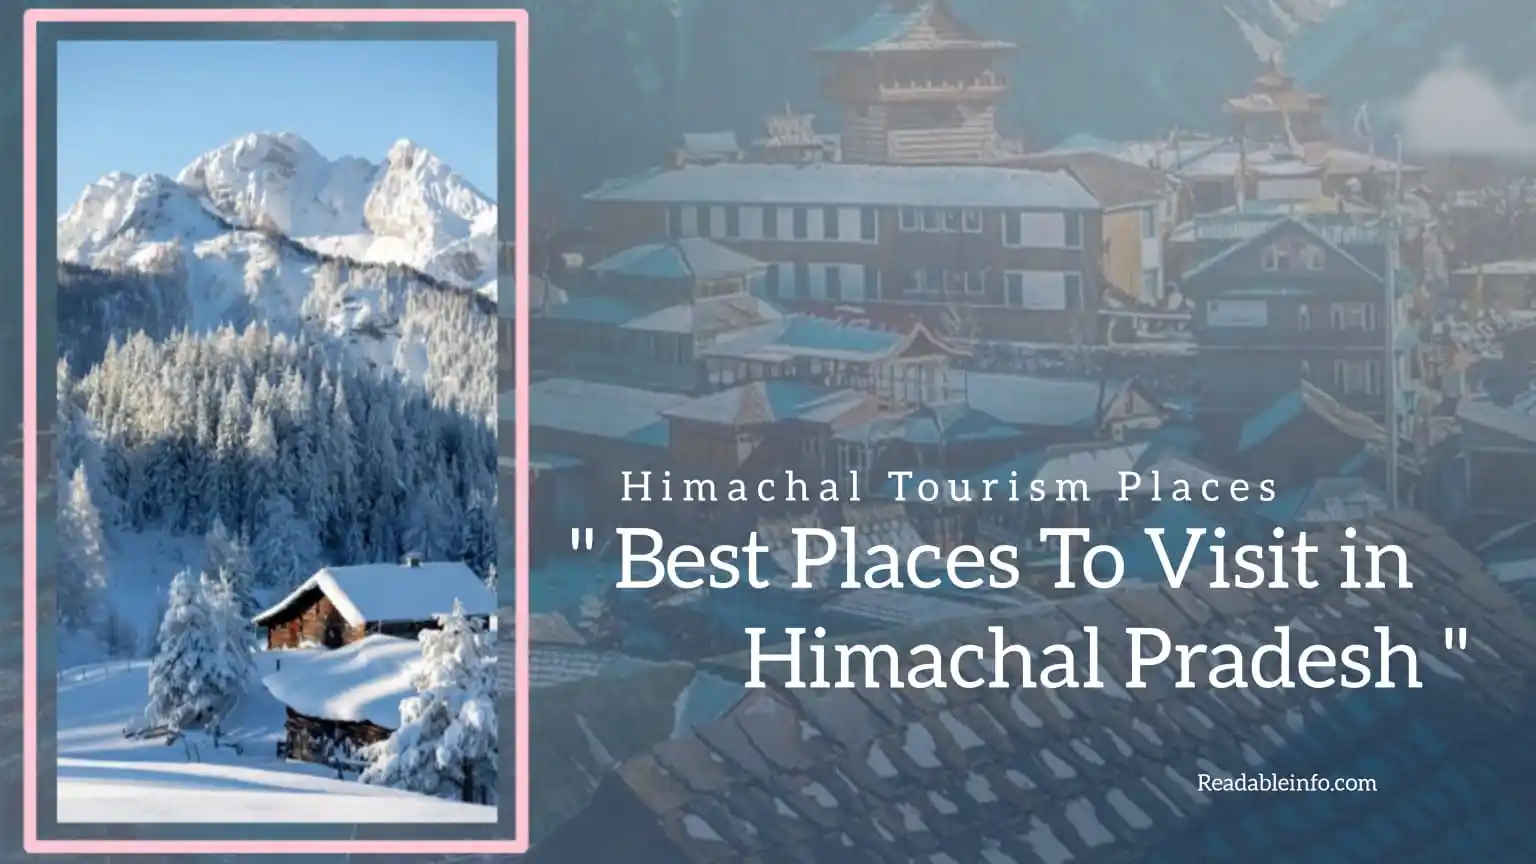 You are currently viewing Best places to visit in Himachal Pradesh (Himachal Tourism Places)